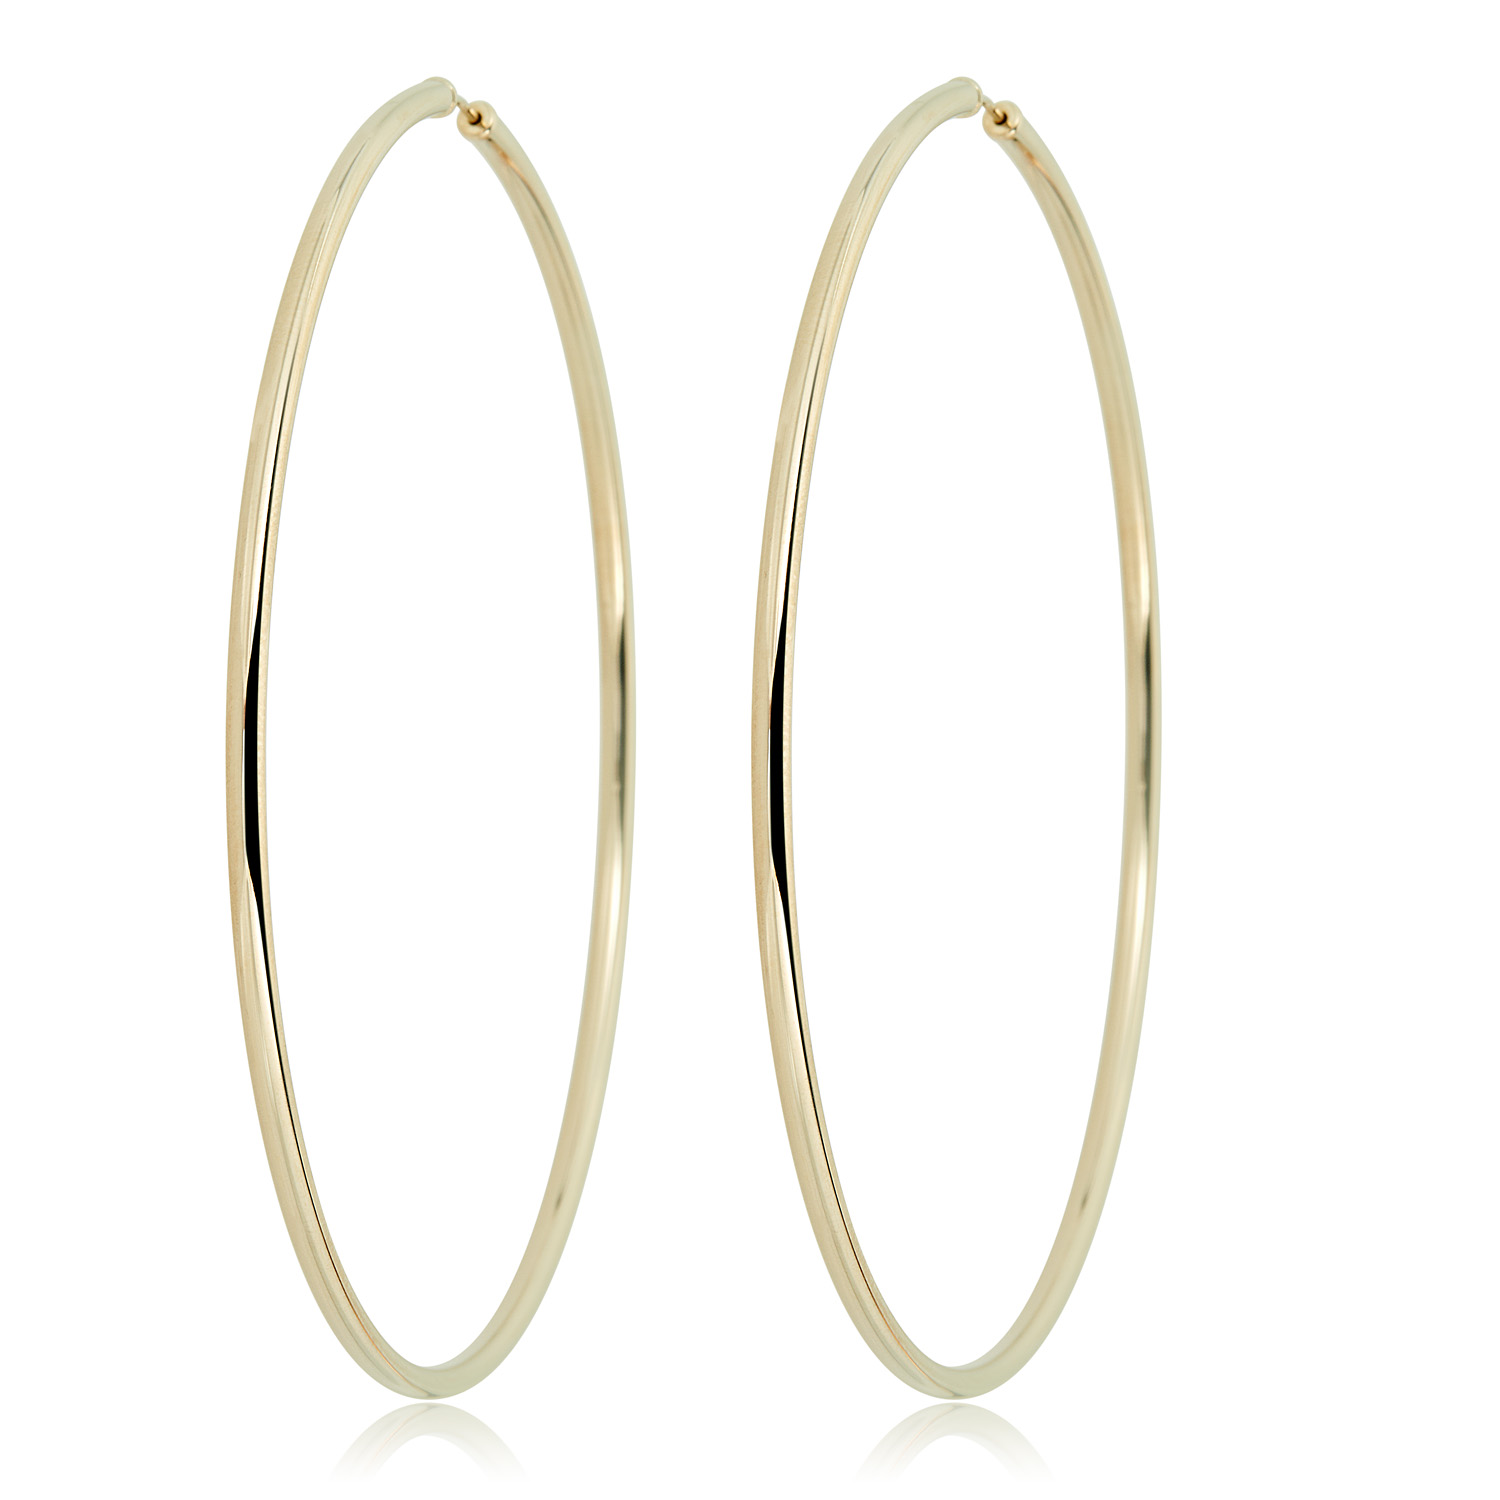 Avora 14K  Gold Polished Endless Continuous Large Hoop Earrings - Yellow or White Gold